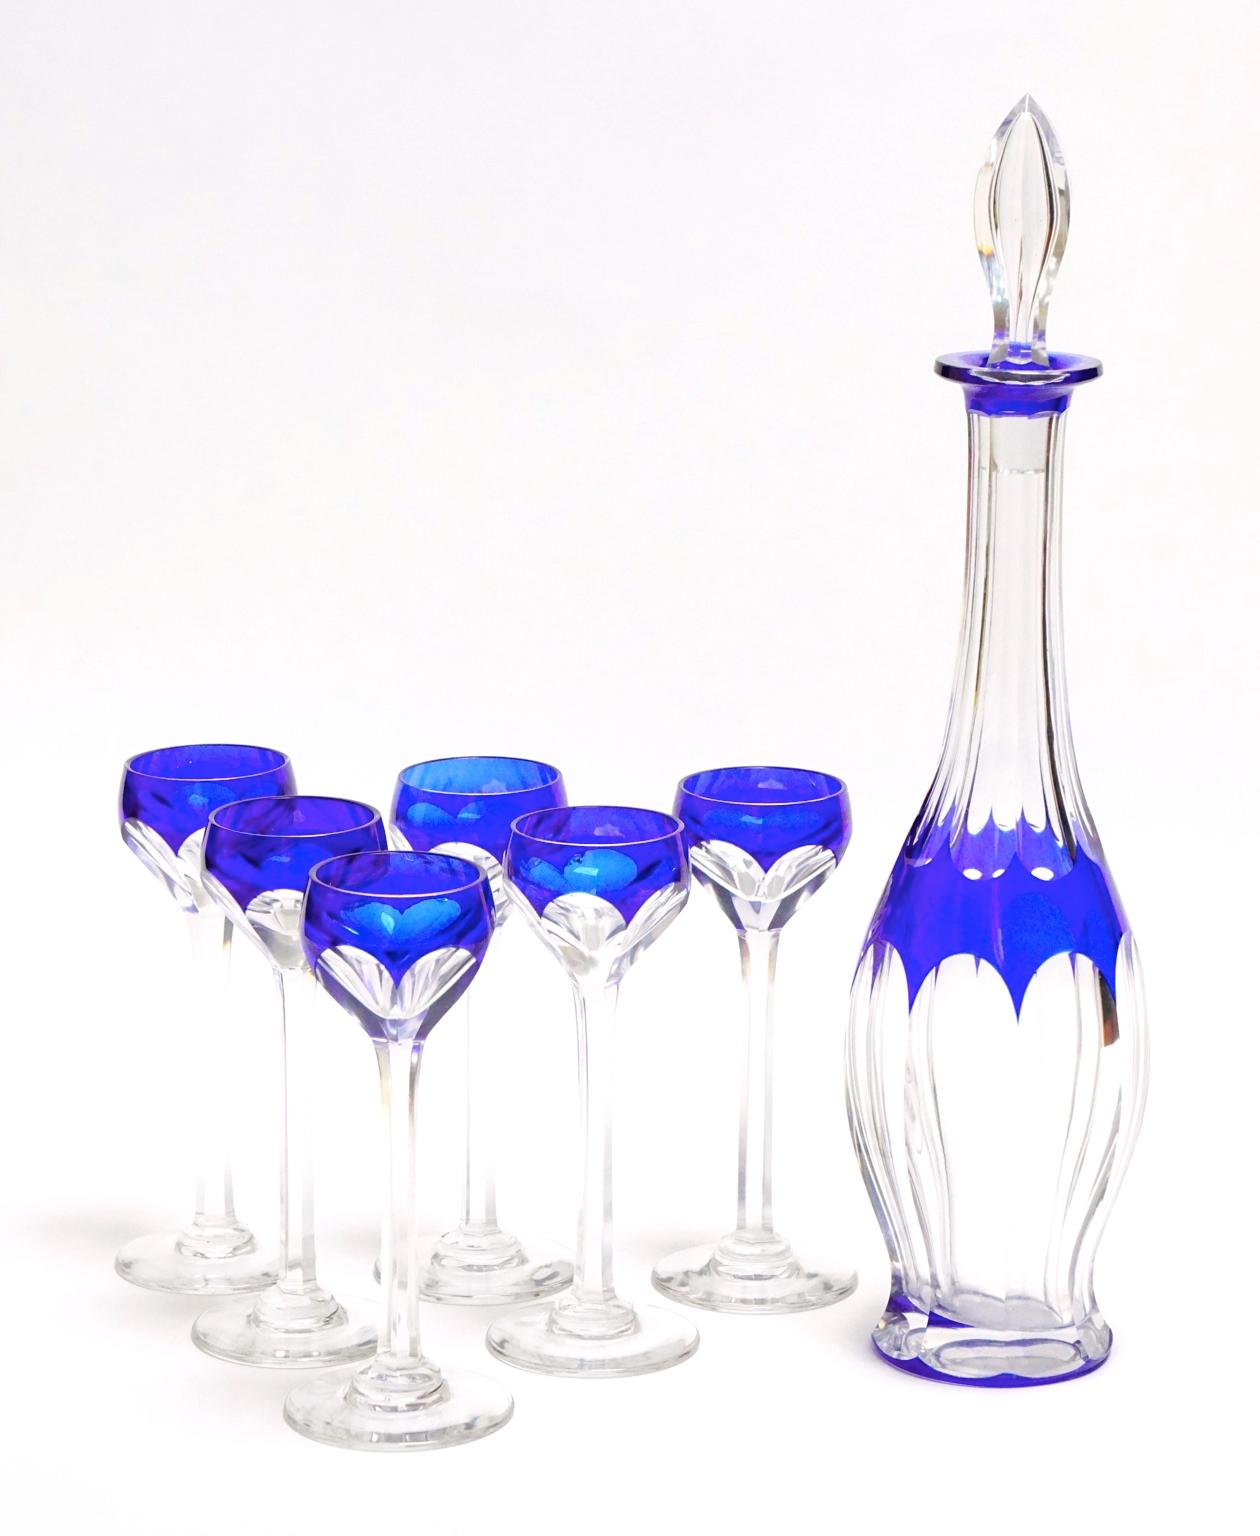 A crystal decanter in blue overlay set with six glasses in very good condition. Original stopper. 
Size:
Decanter, height 31.5 cm, diameter 6.5 cm.
Eight glasses, height 13.5 cm, diameter 4 cm.